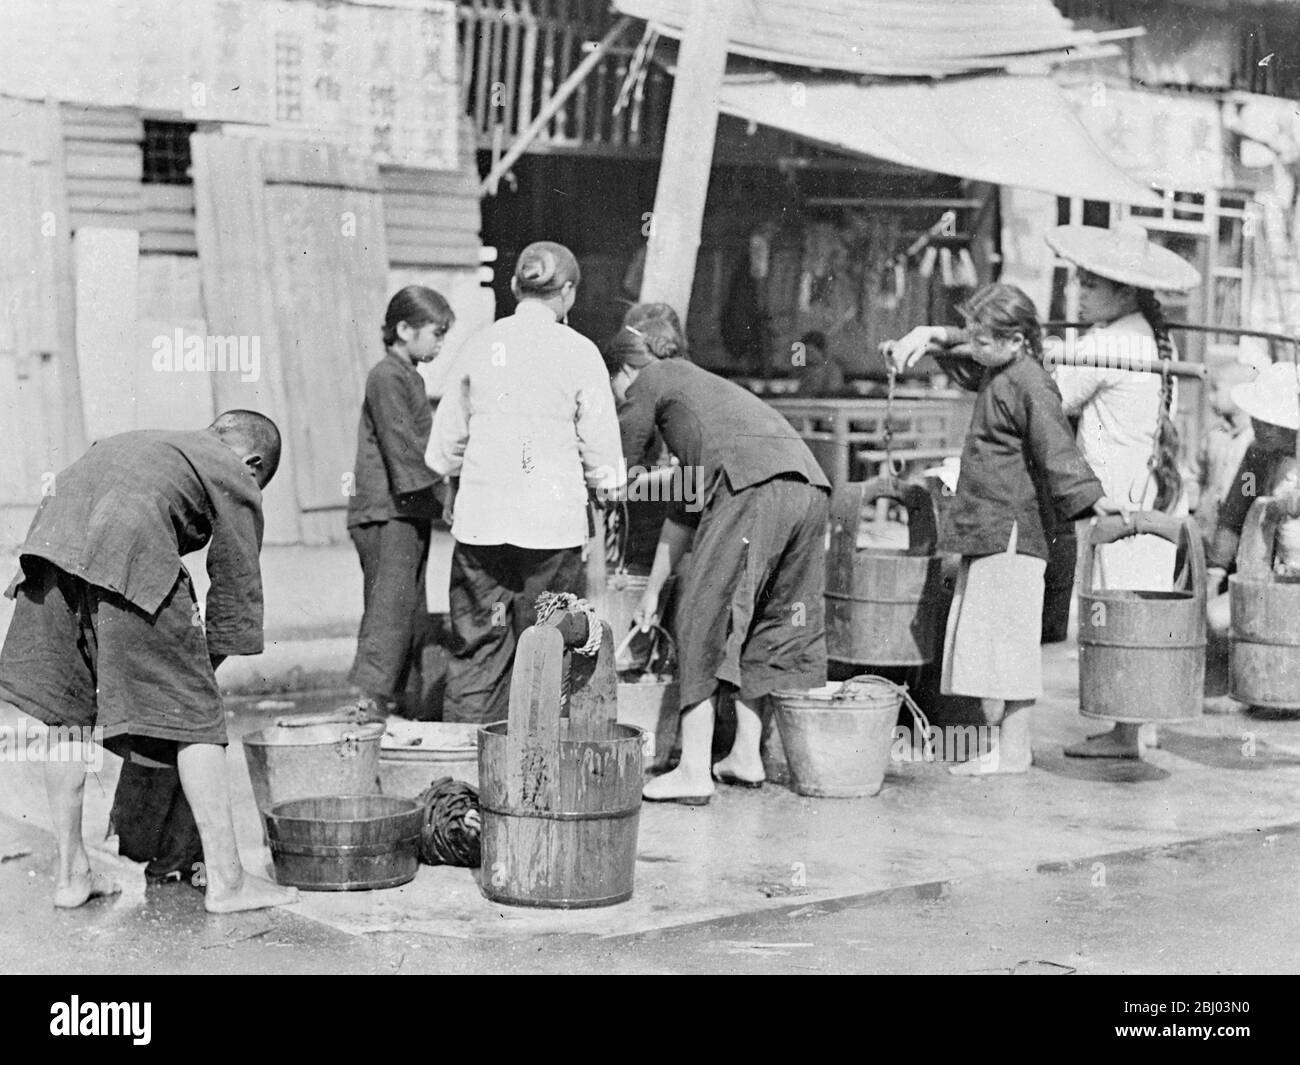 A thousand people are reported dead after a horrific dawn air raid on Canton, South China, by Japanese bombing planes. Many of the bombs fell in the densely populated poorer districts of the city. Women and children drawing water at the public well in a poor district of Shanghai. Fresh drinking water is scarce and many people are now leaving by walking water through the streets. - 23 September 1937 Stock Photo